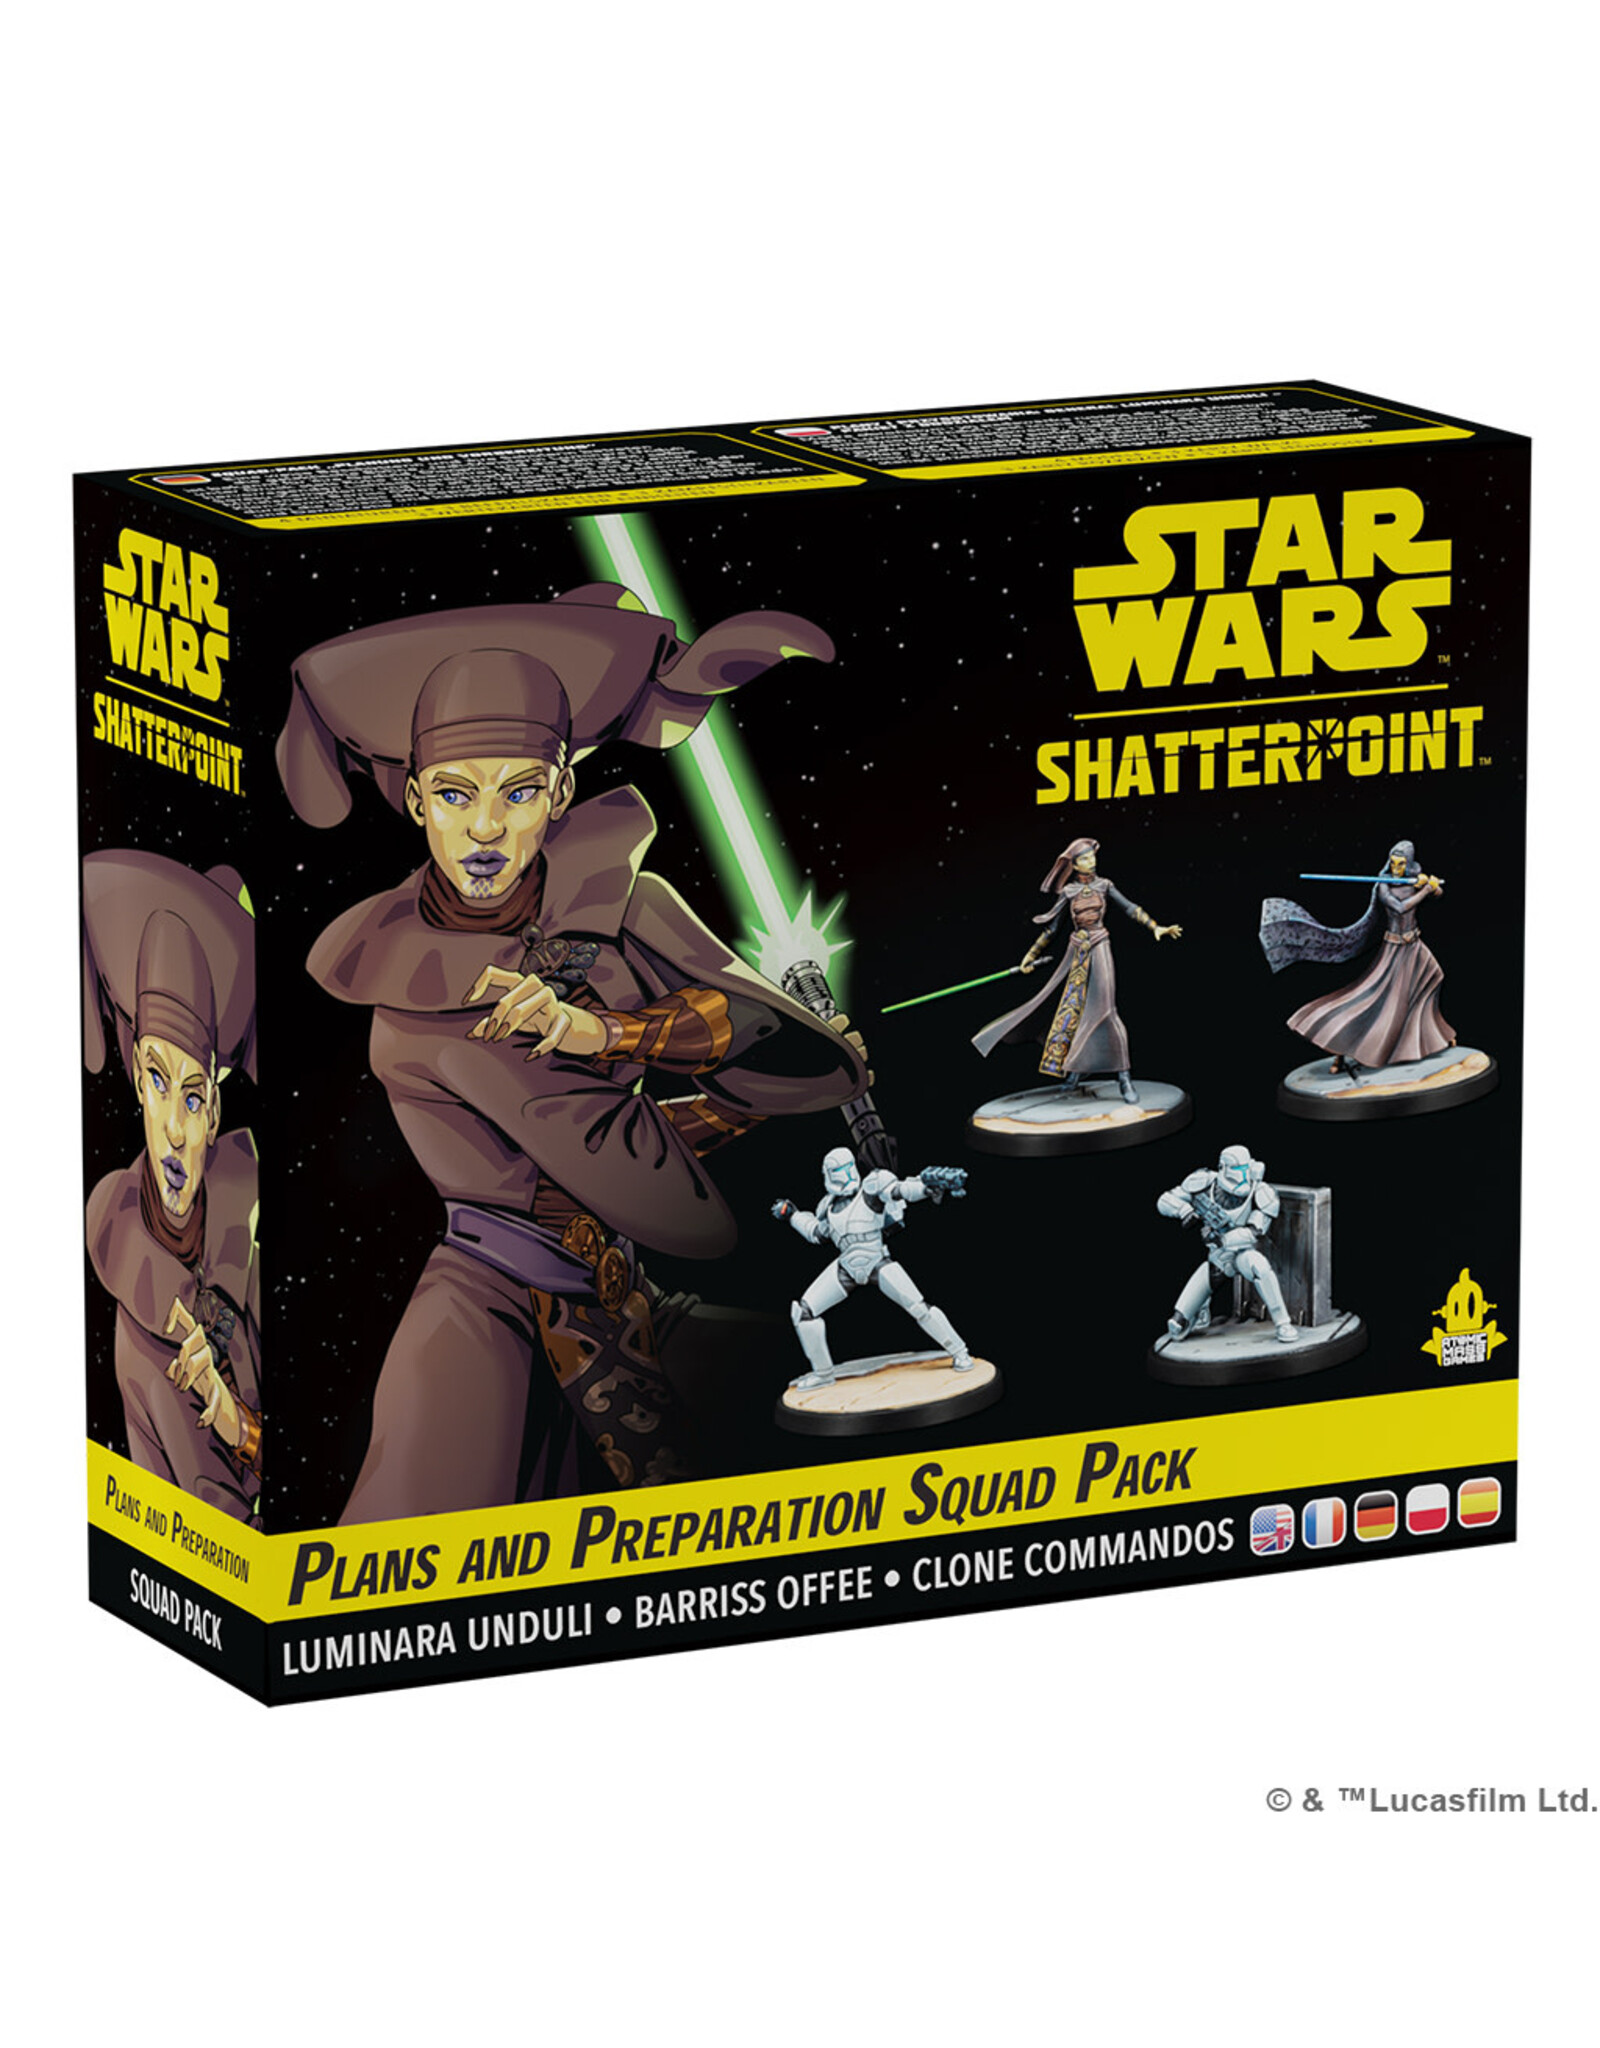 Star Wars Shatterpoint Star Wars Shatterpoint Plans and Preparation Squad Pack